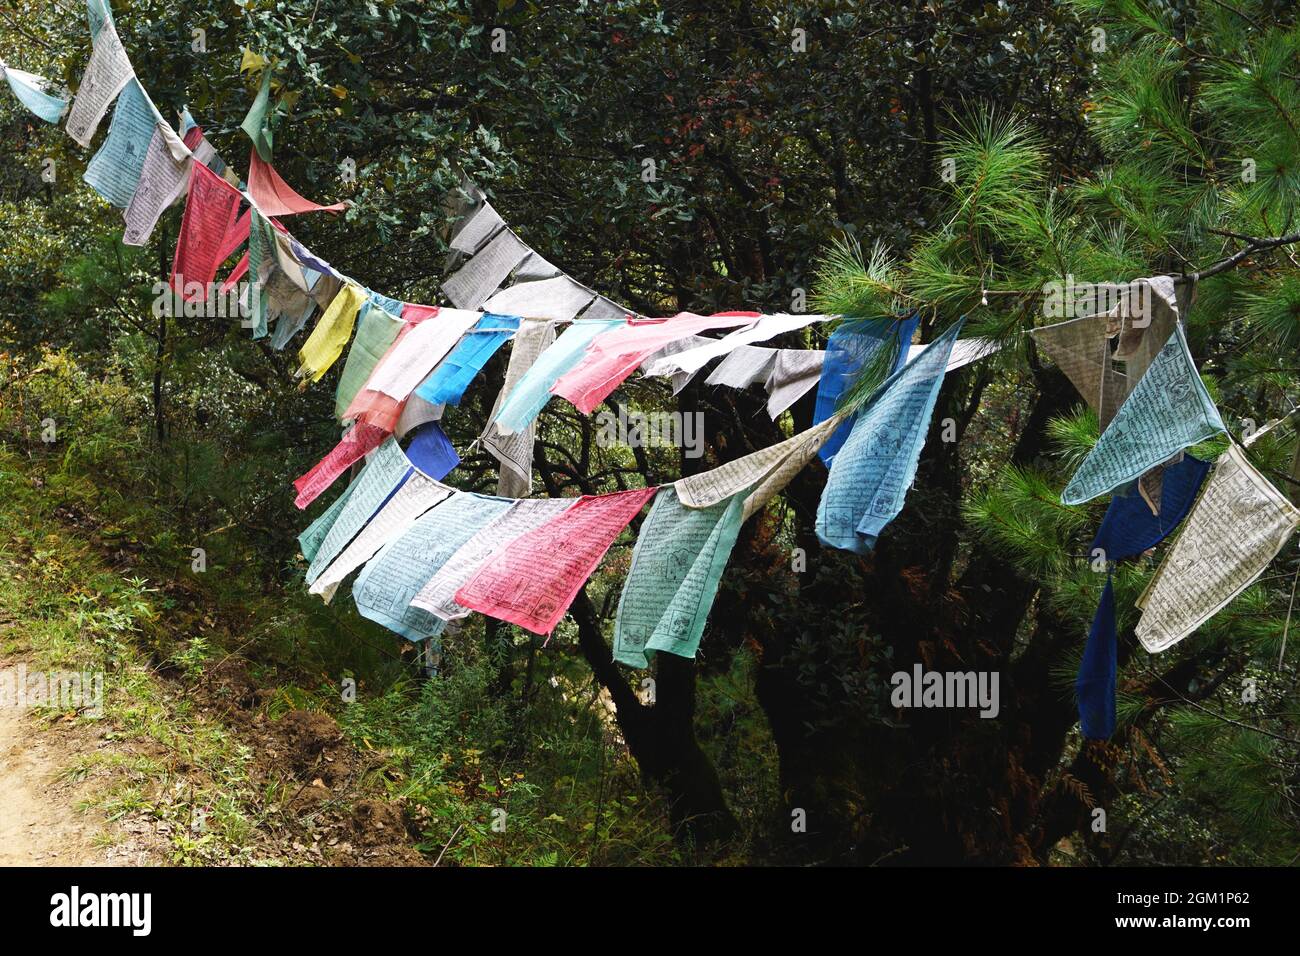 Rows of colorful prayer flags wave in the breeze along a forested trail in rural Bhutan. Legends trace the origin of the prayer flag to Buddha. Stock Photo